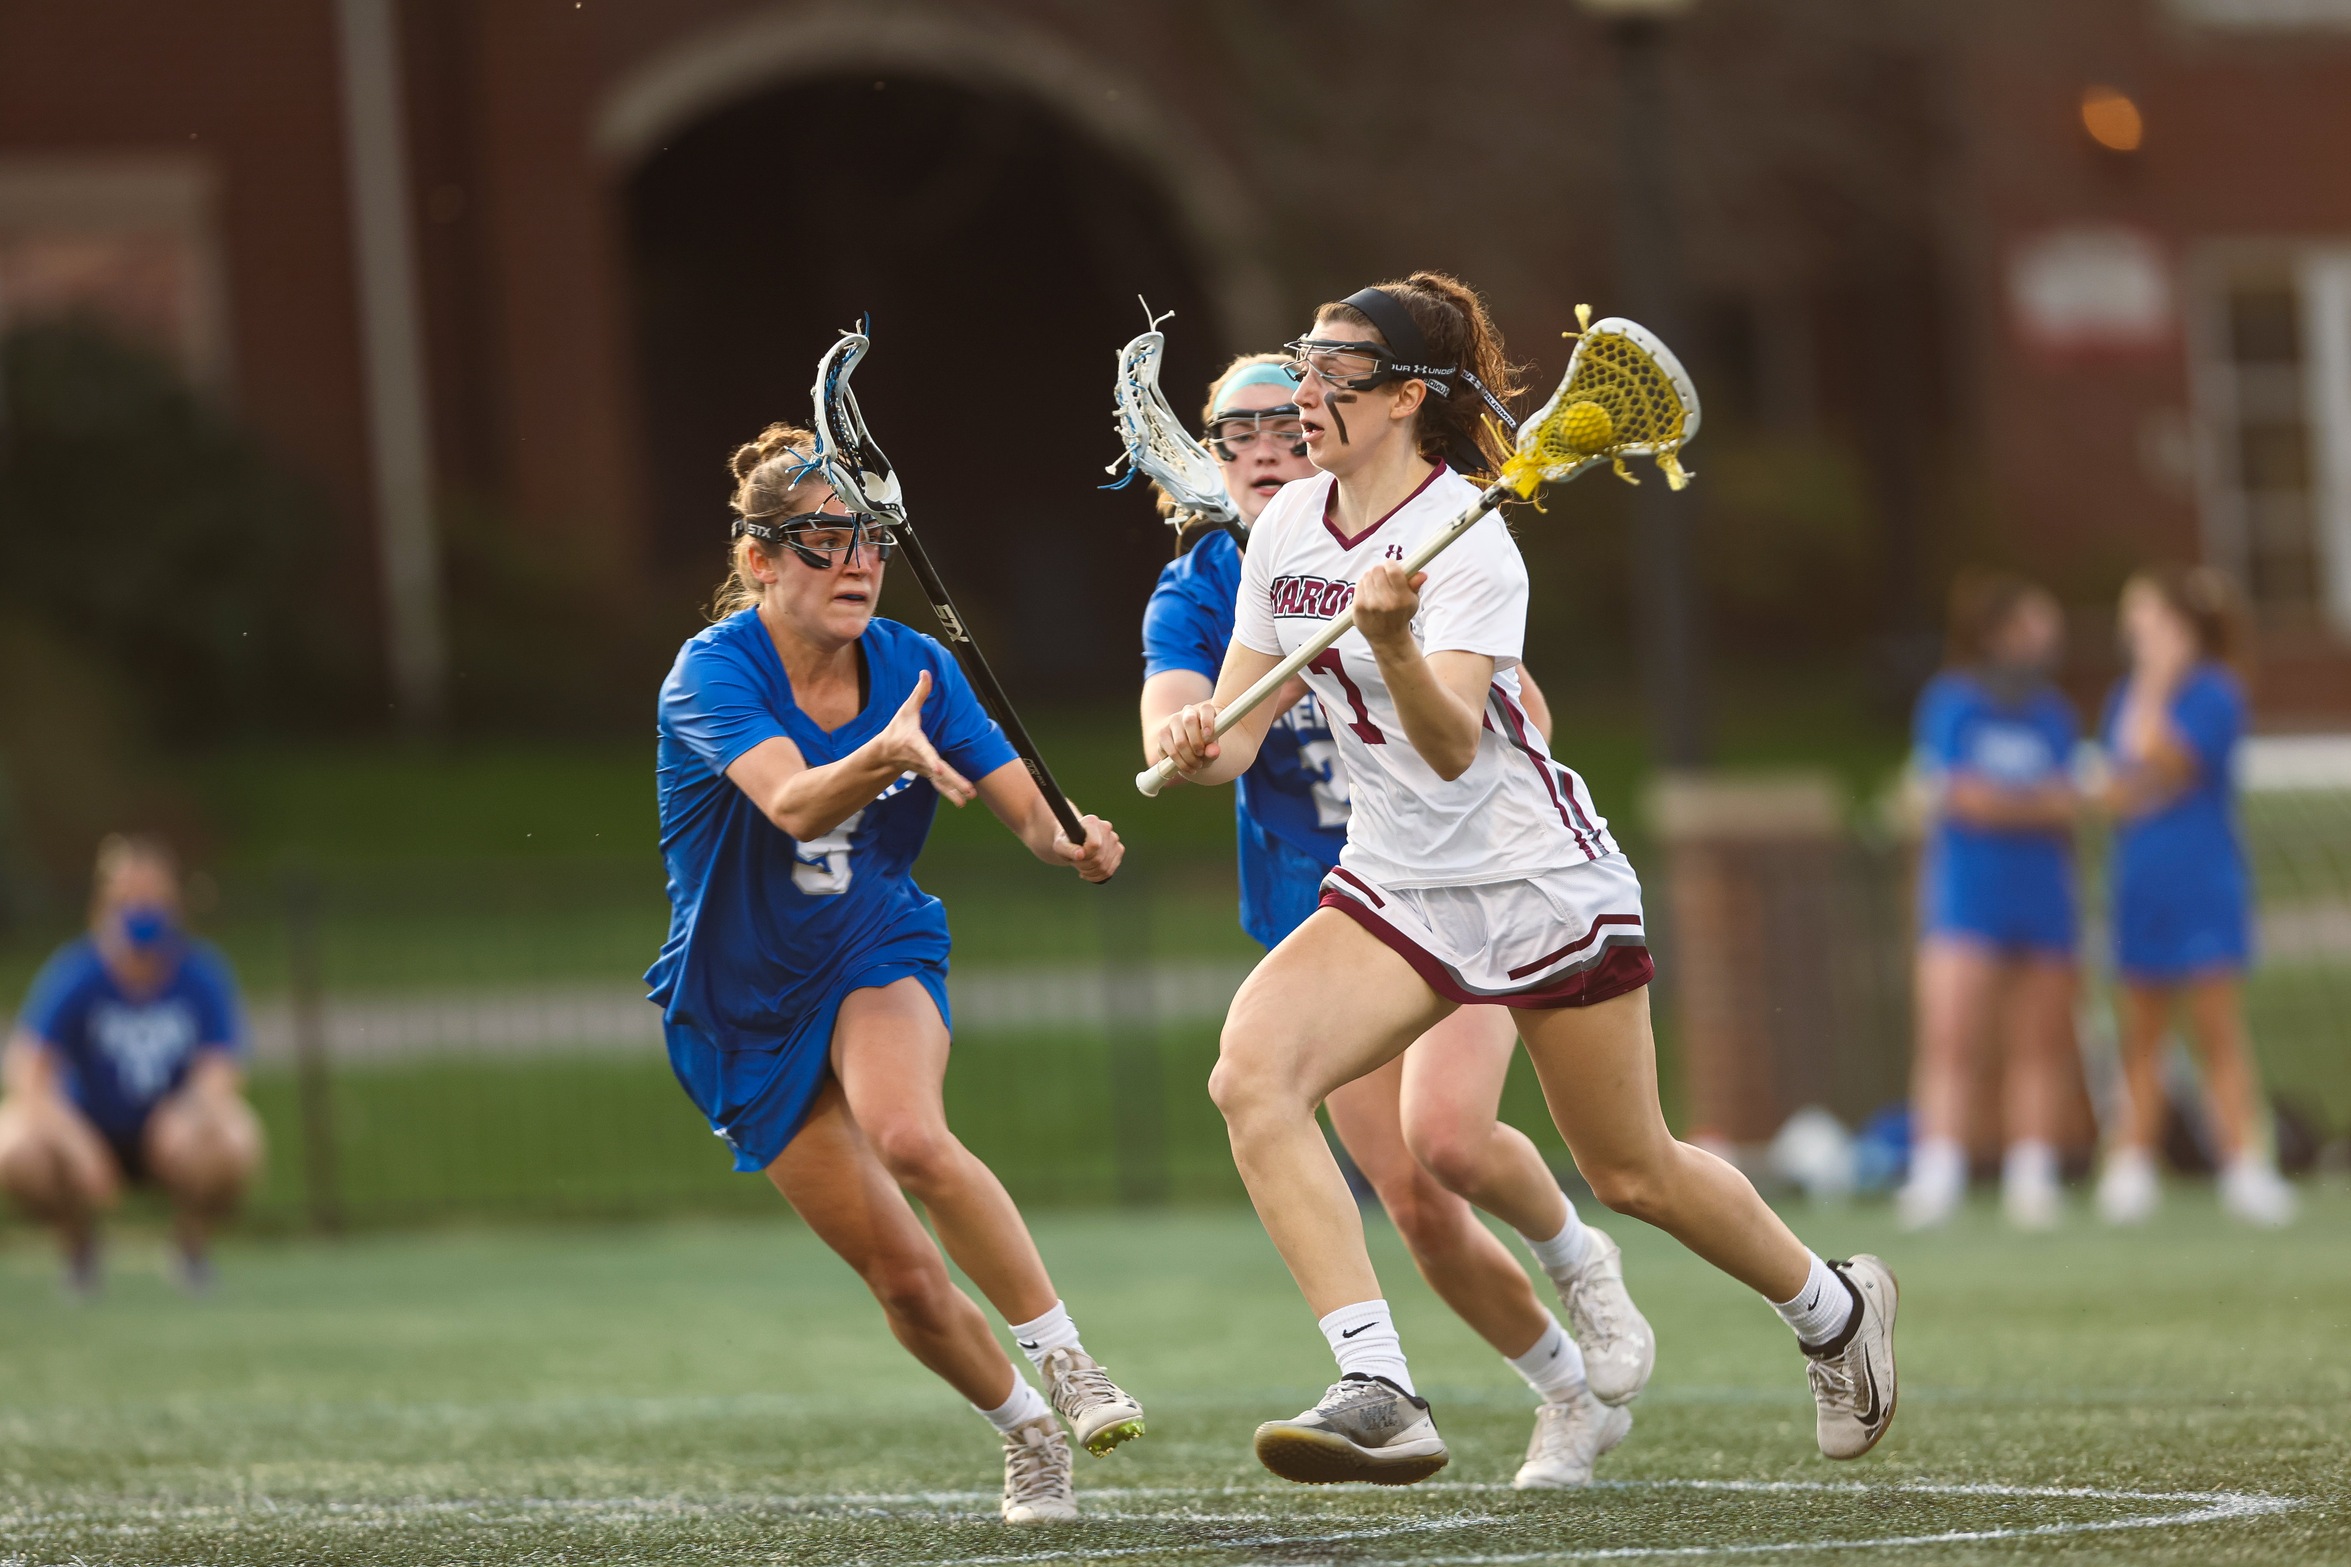 action photo of RC women's lacrosse Lilly Blair with ball against defenders